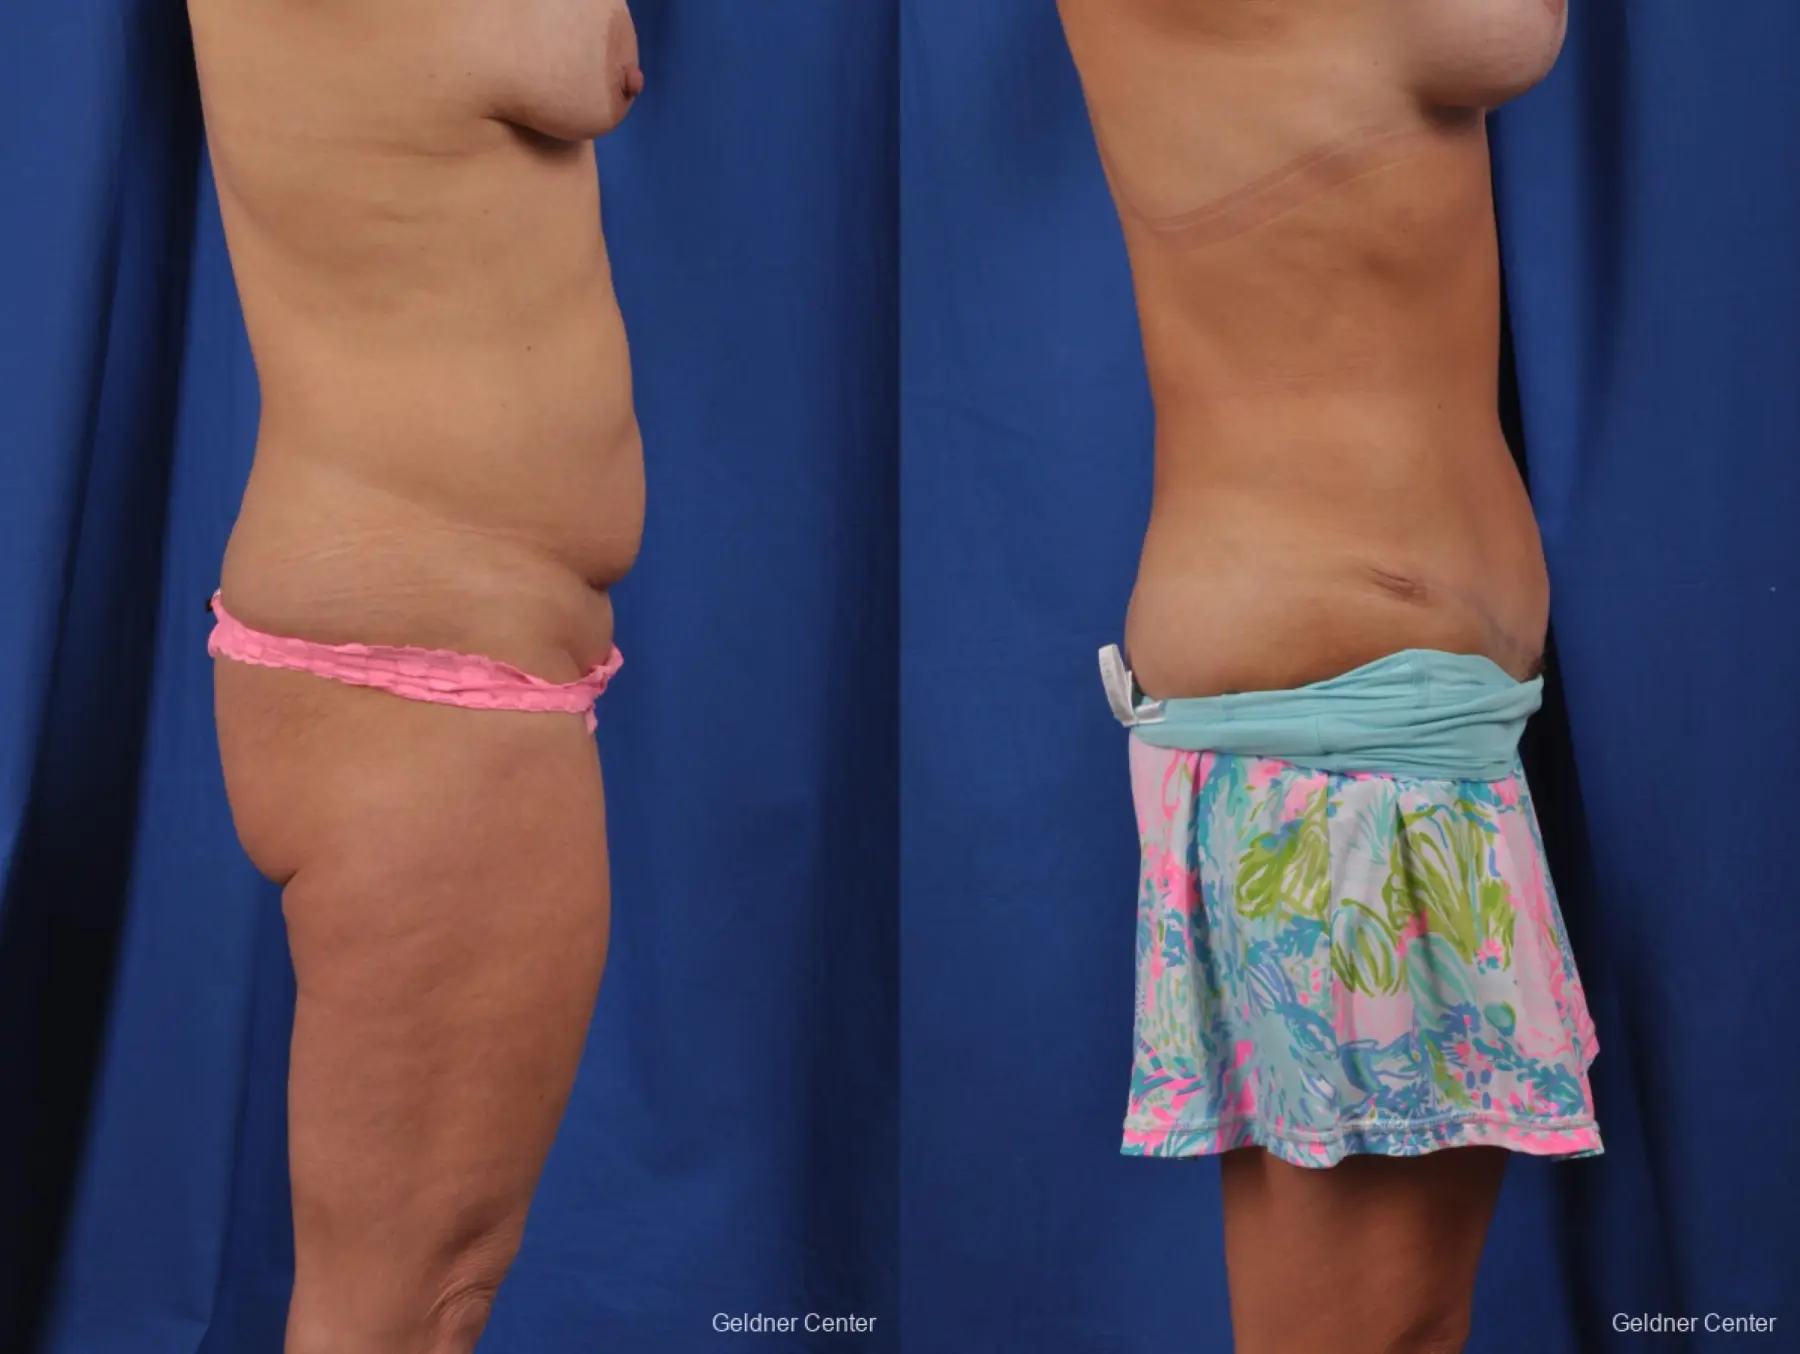 Abdominoplasty: Patient 1 - Before and After 2